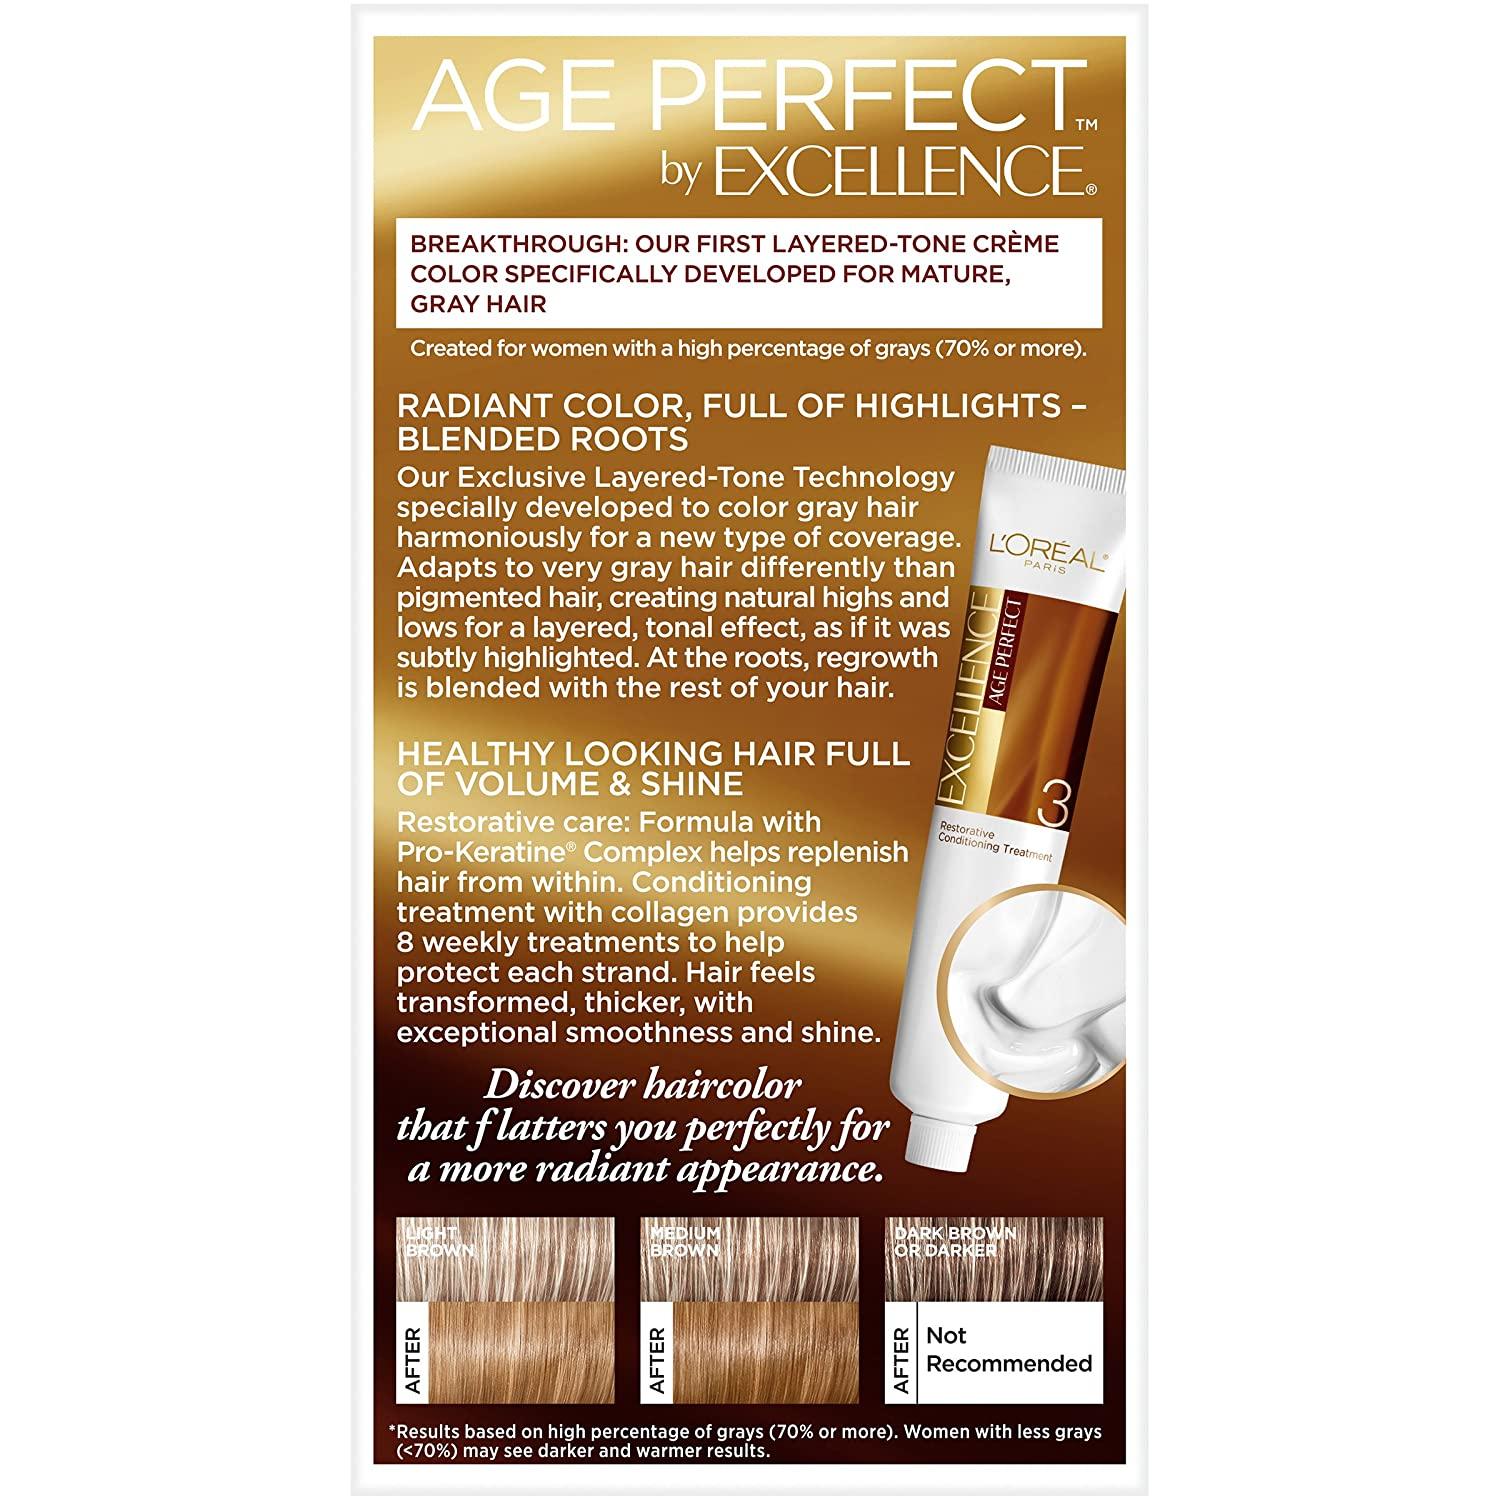 L'Oreal Paris ExcellenceAge Perfect Layered Tone Flattering Color, 6.5G Lightest Soft Golden (Packaging May Vary)